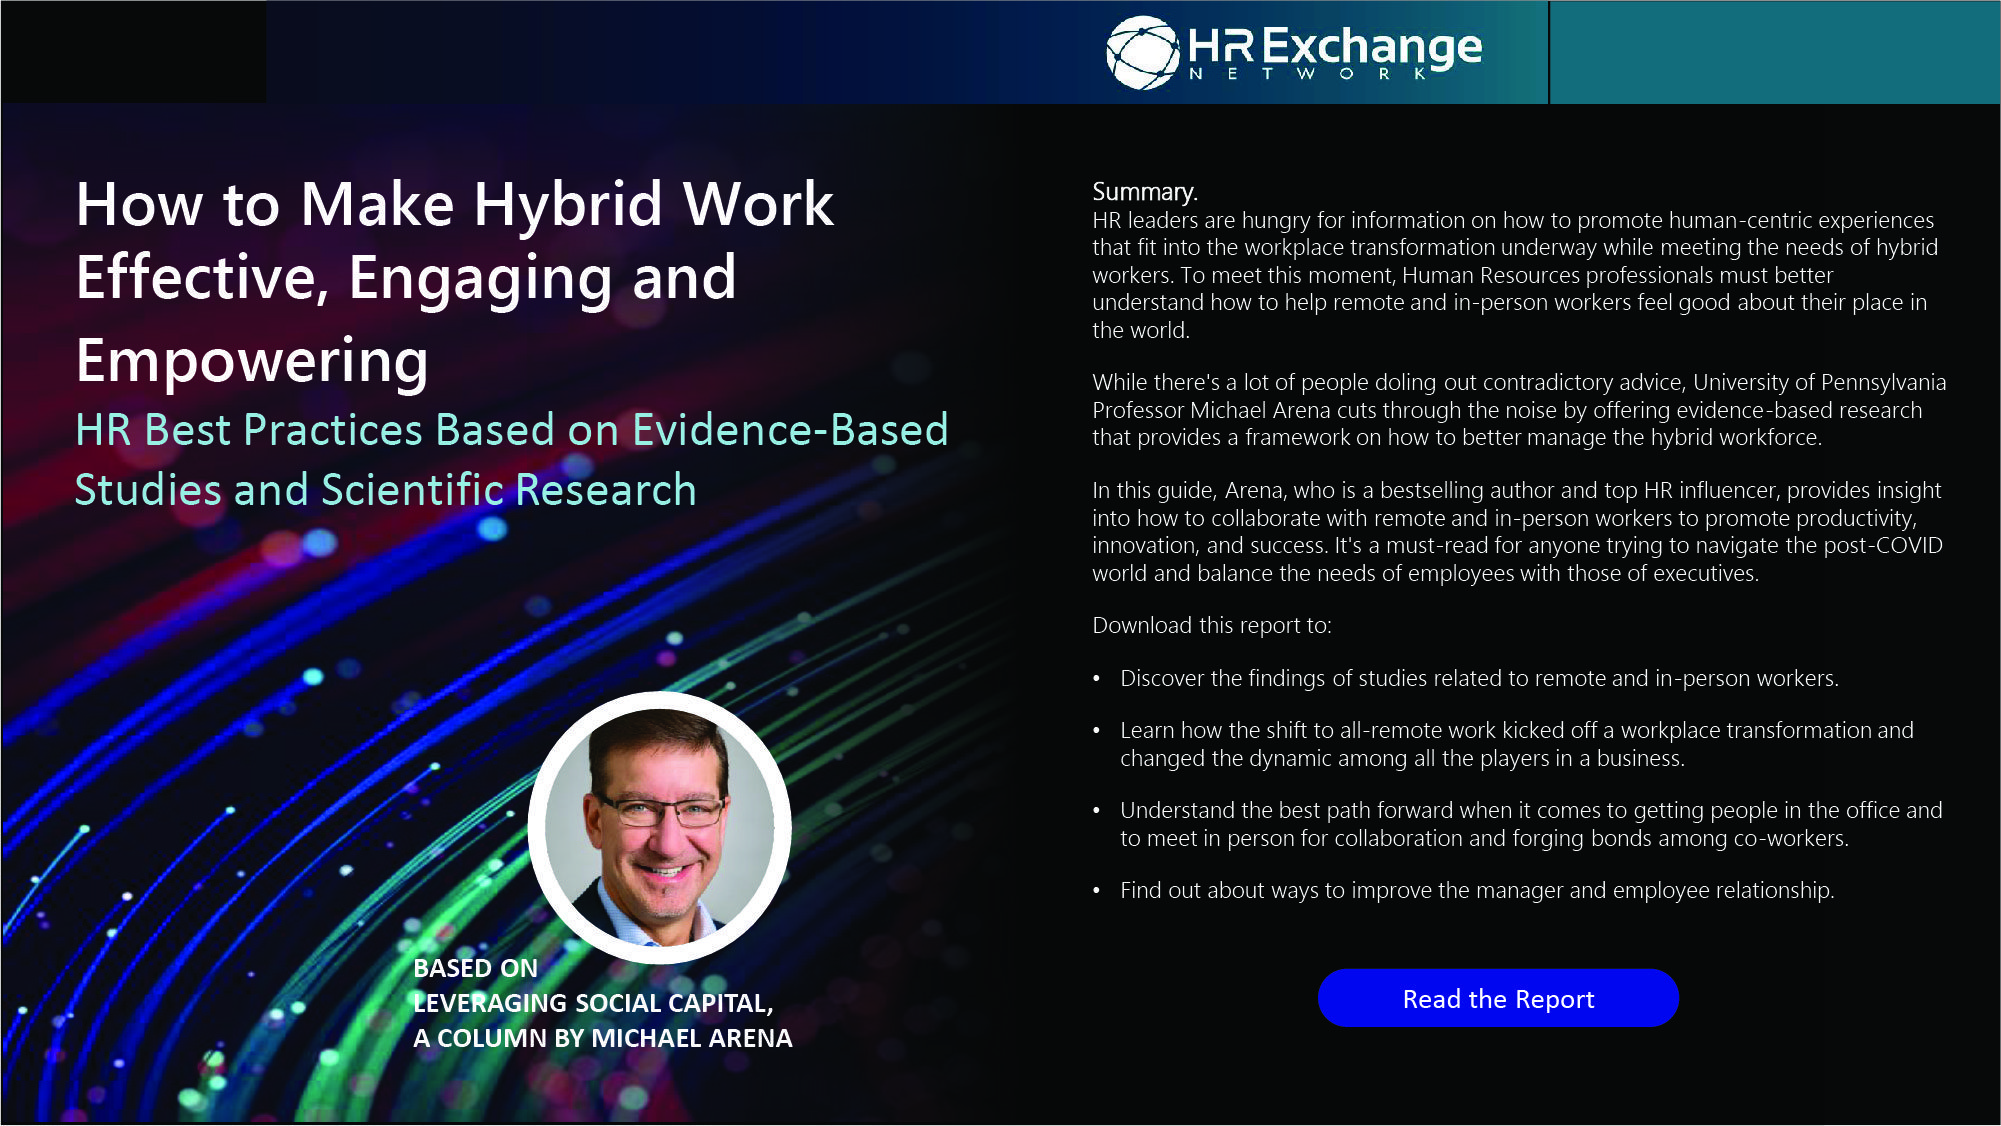 How to make hybrid work effective, engaging and empowering